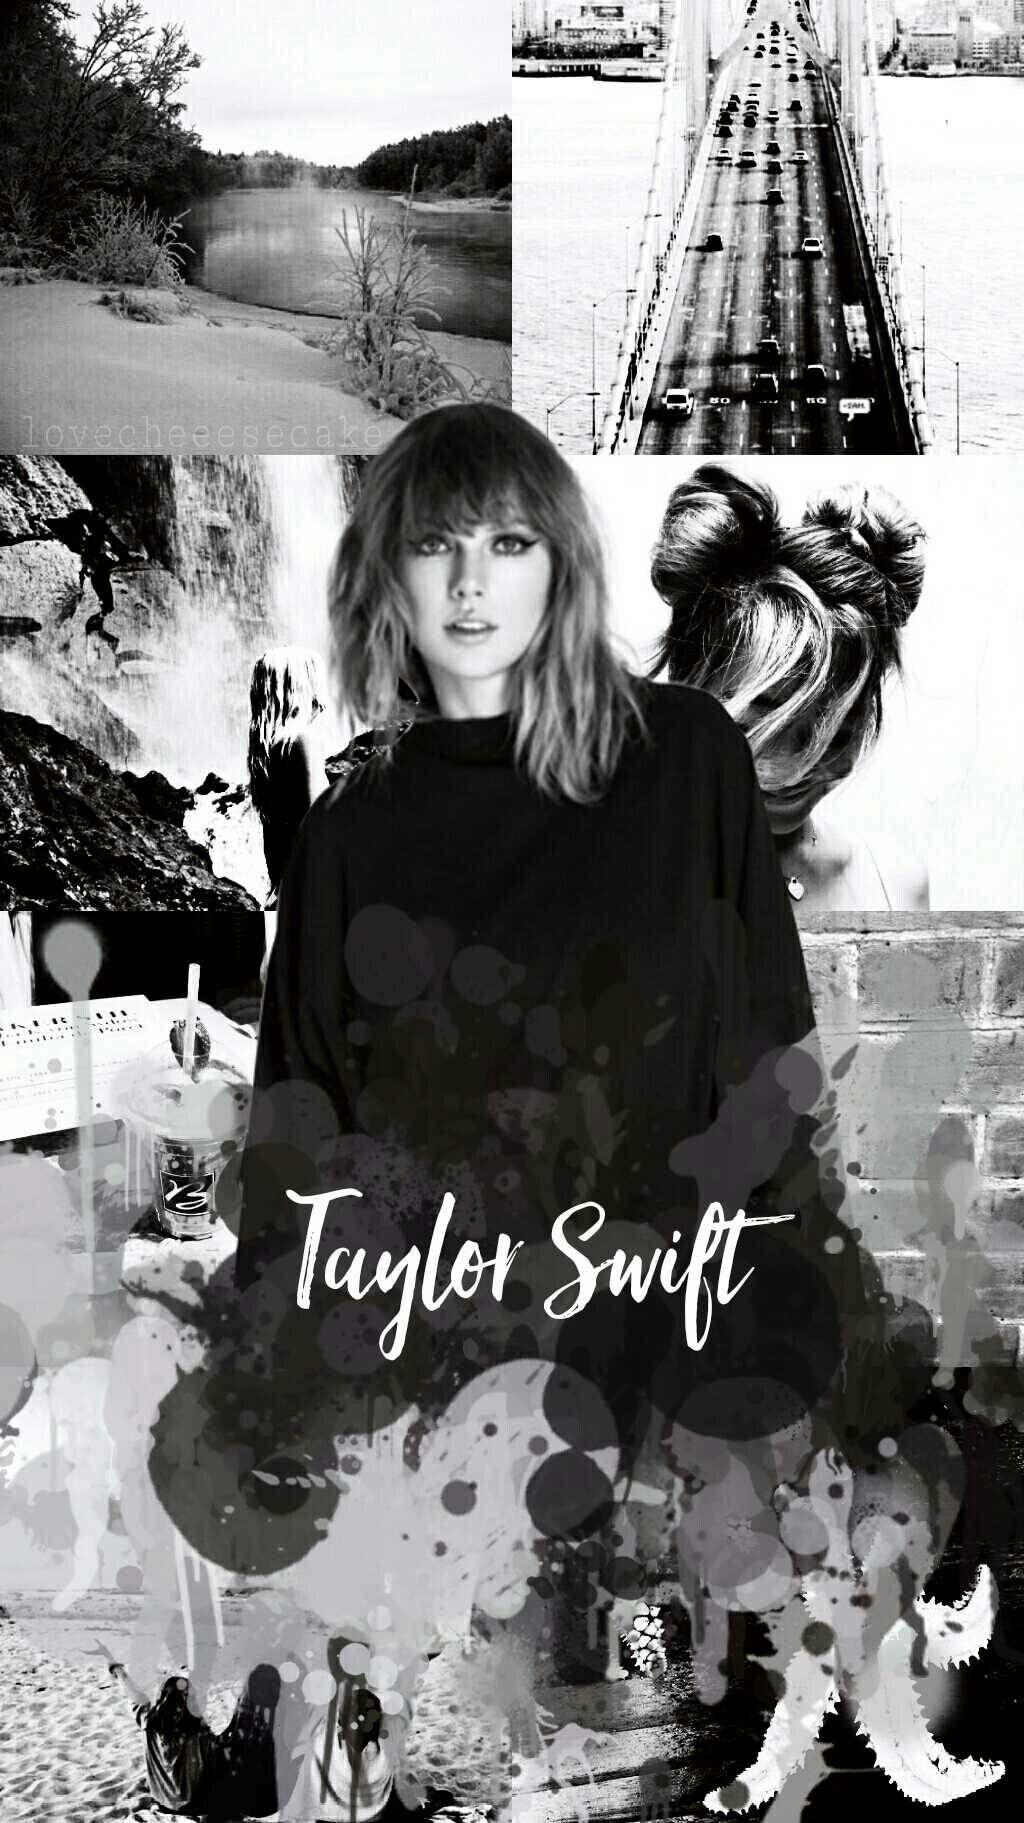 Taylor Swift iPhone Wallpaper by me! Let me know if you want me to make one of your favorite songs! - Taylor Swift